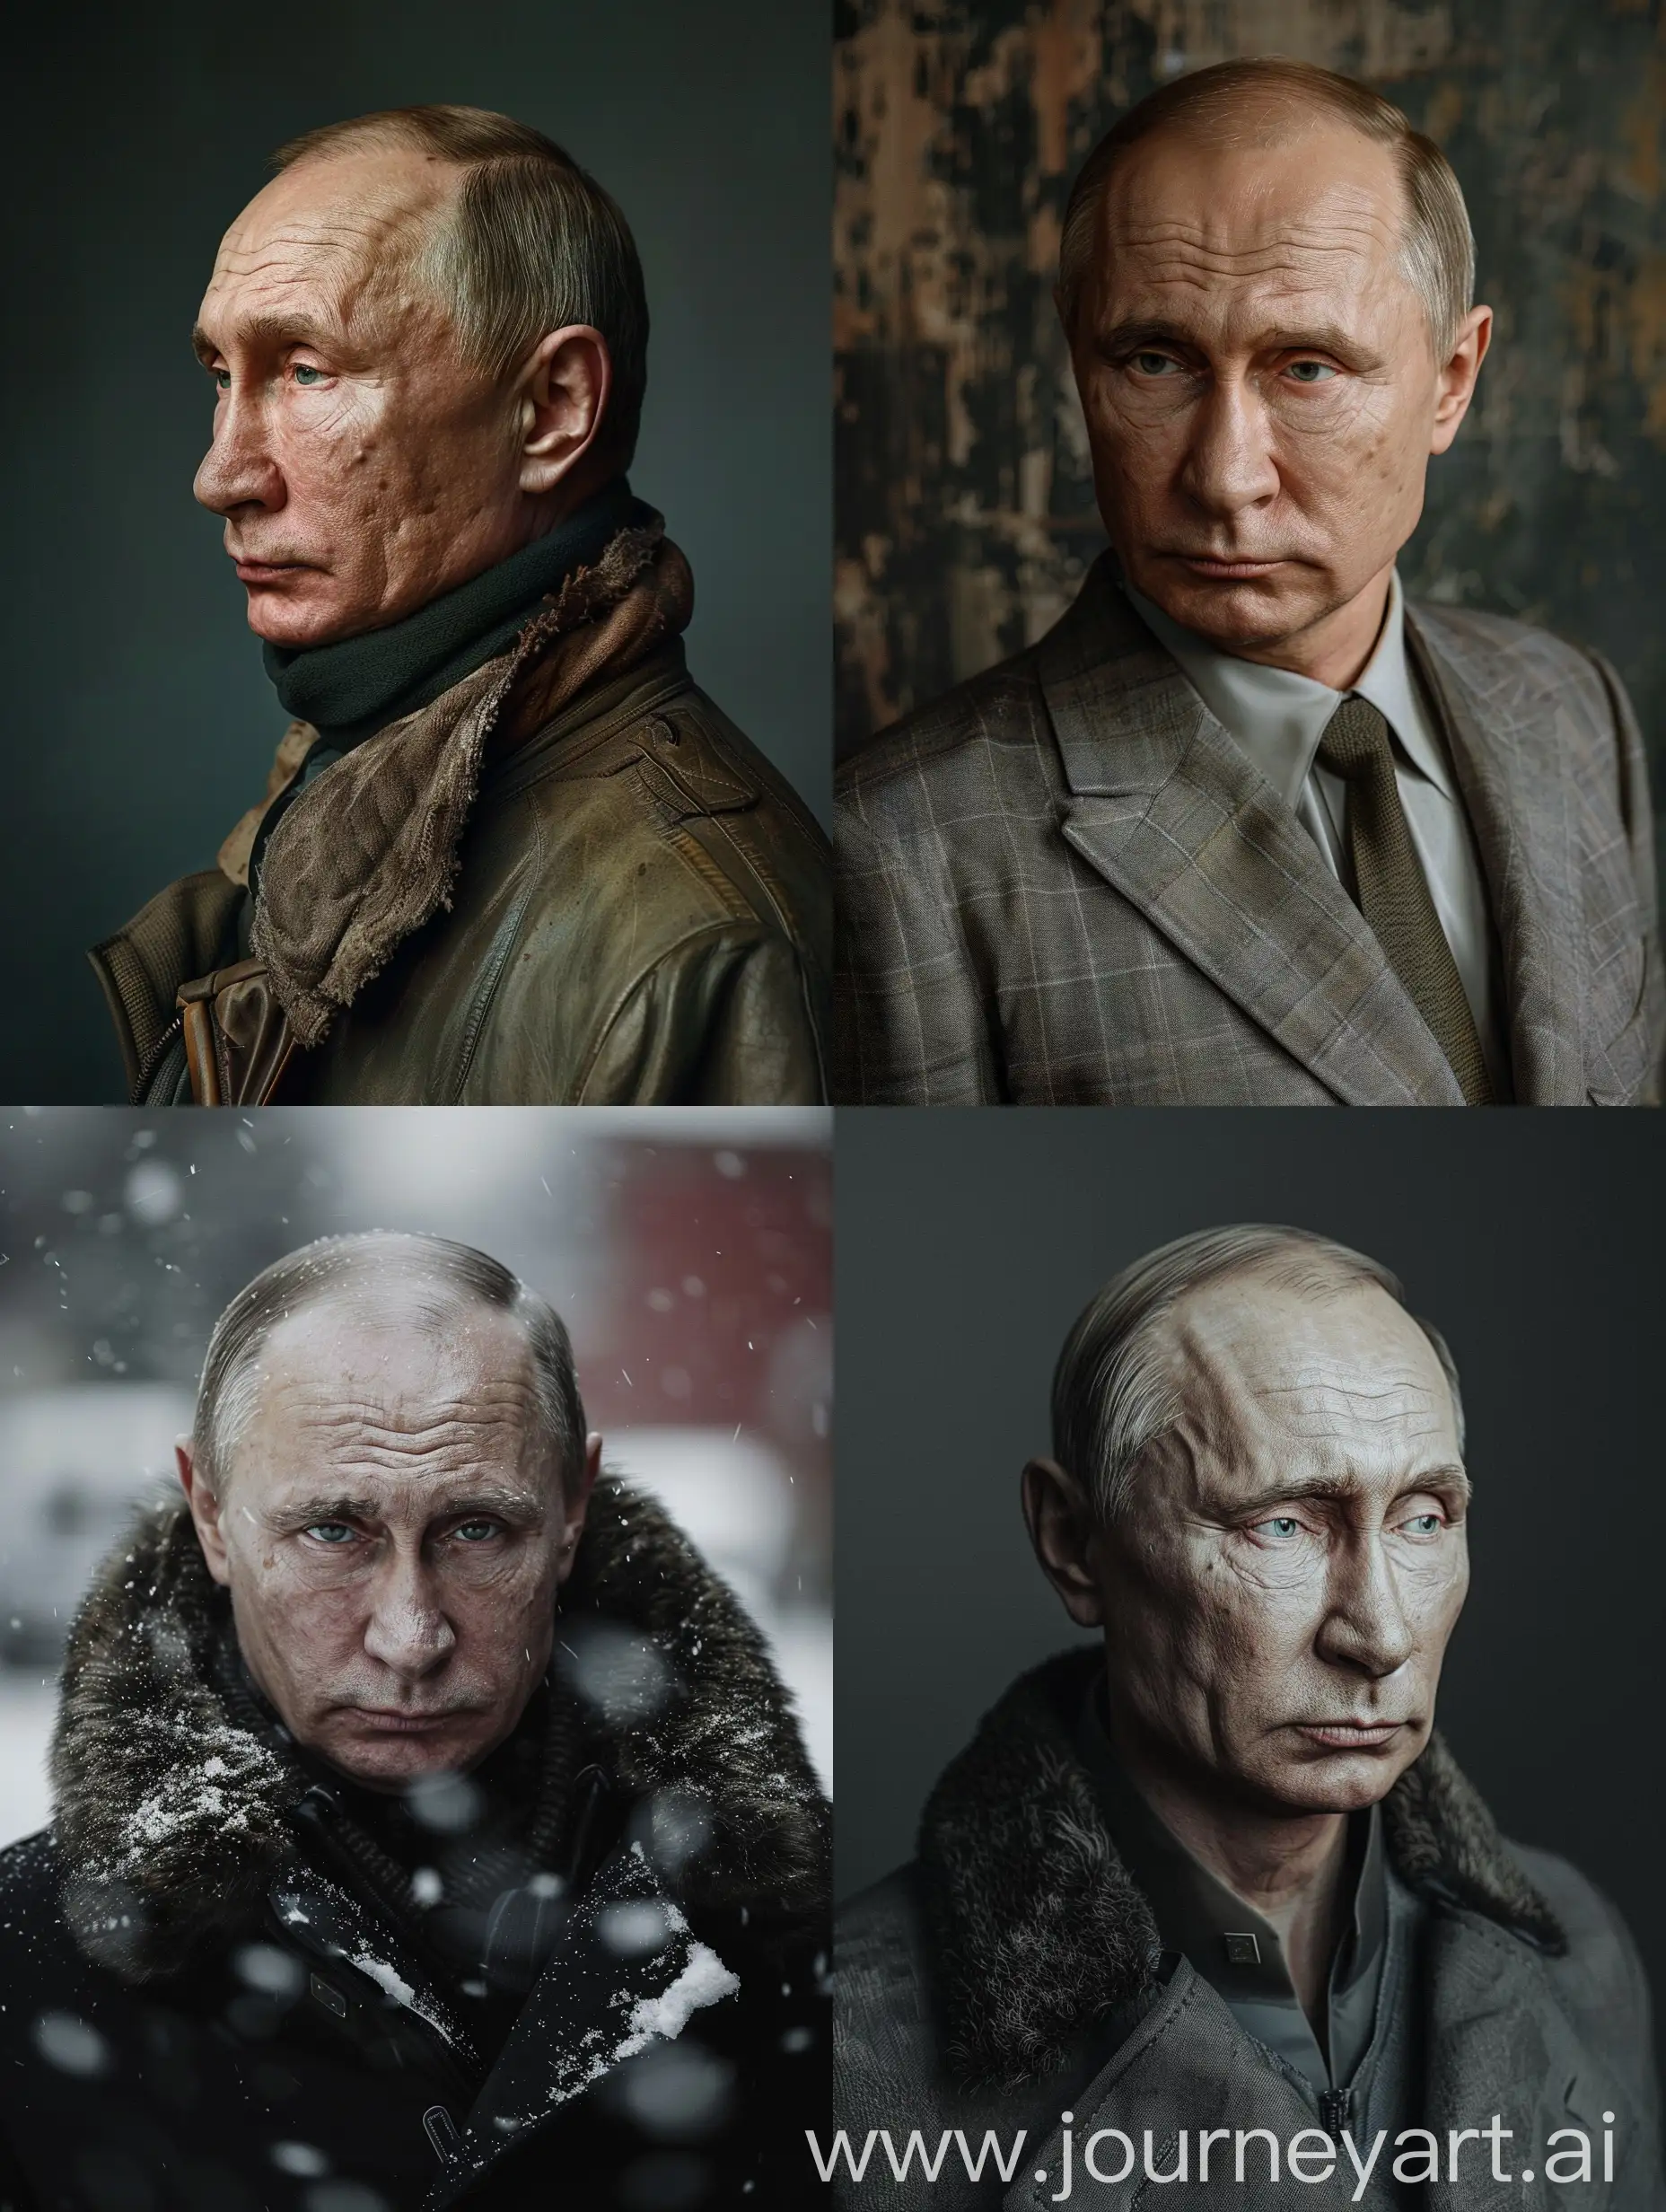 Vivid-Portrait-of-Putin-by-Niki-Boon-in-High-Quality